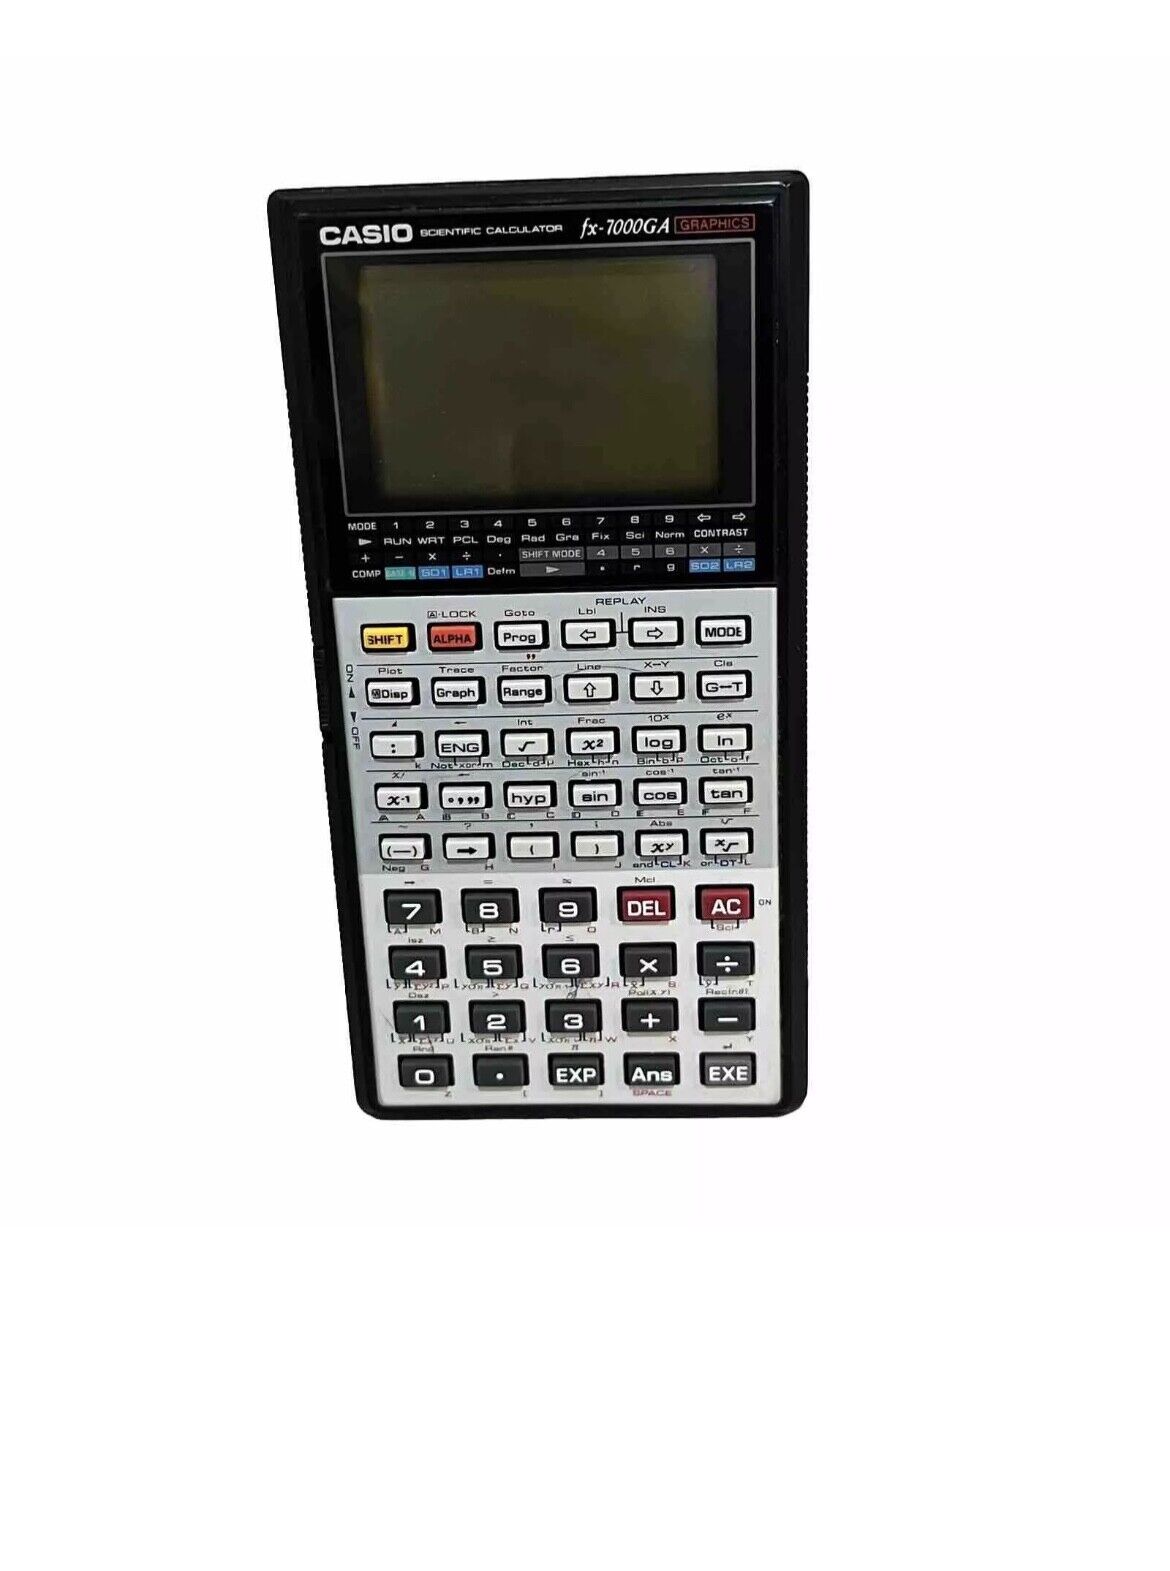 Vintage Casio FX-7000GA Graphics Scientific Calculator with Case Tested Working